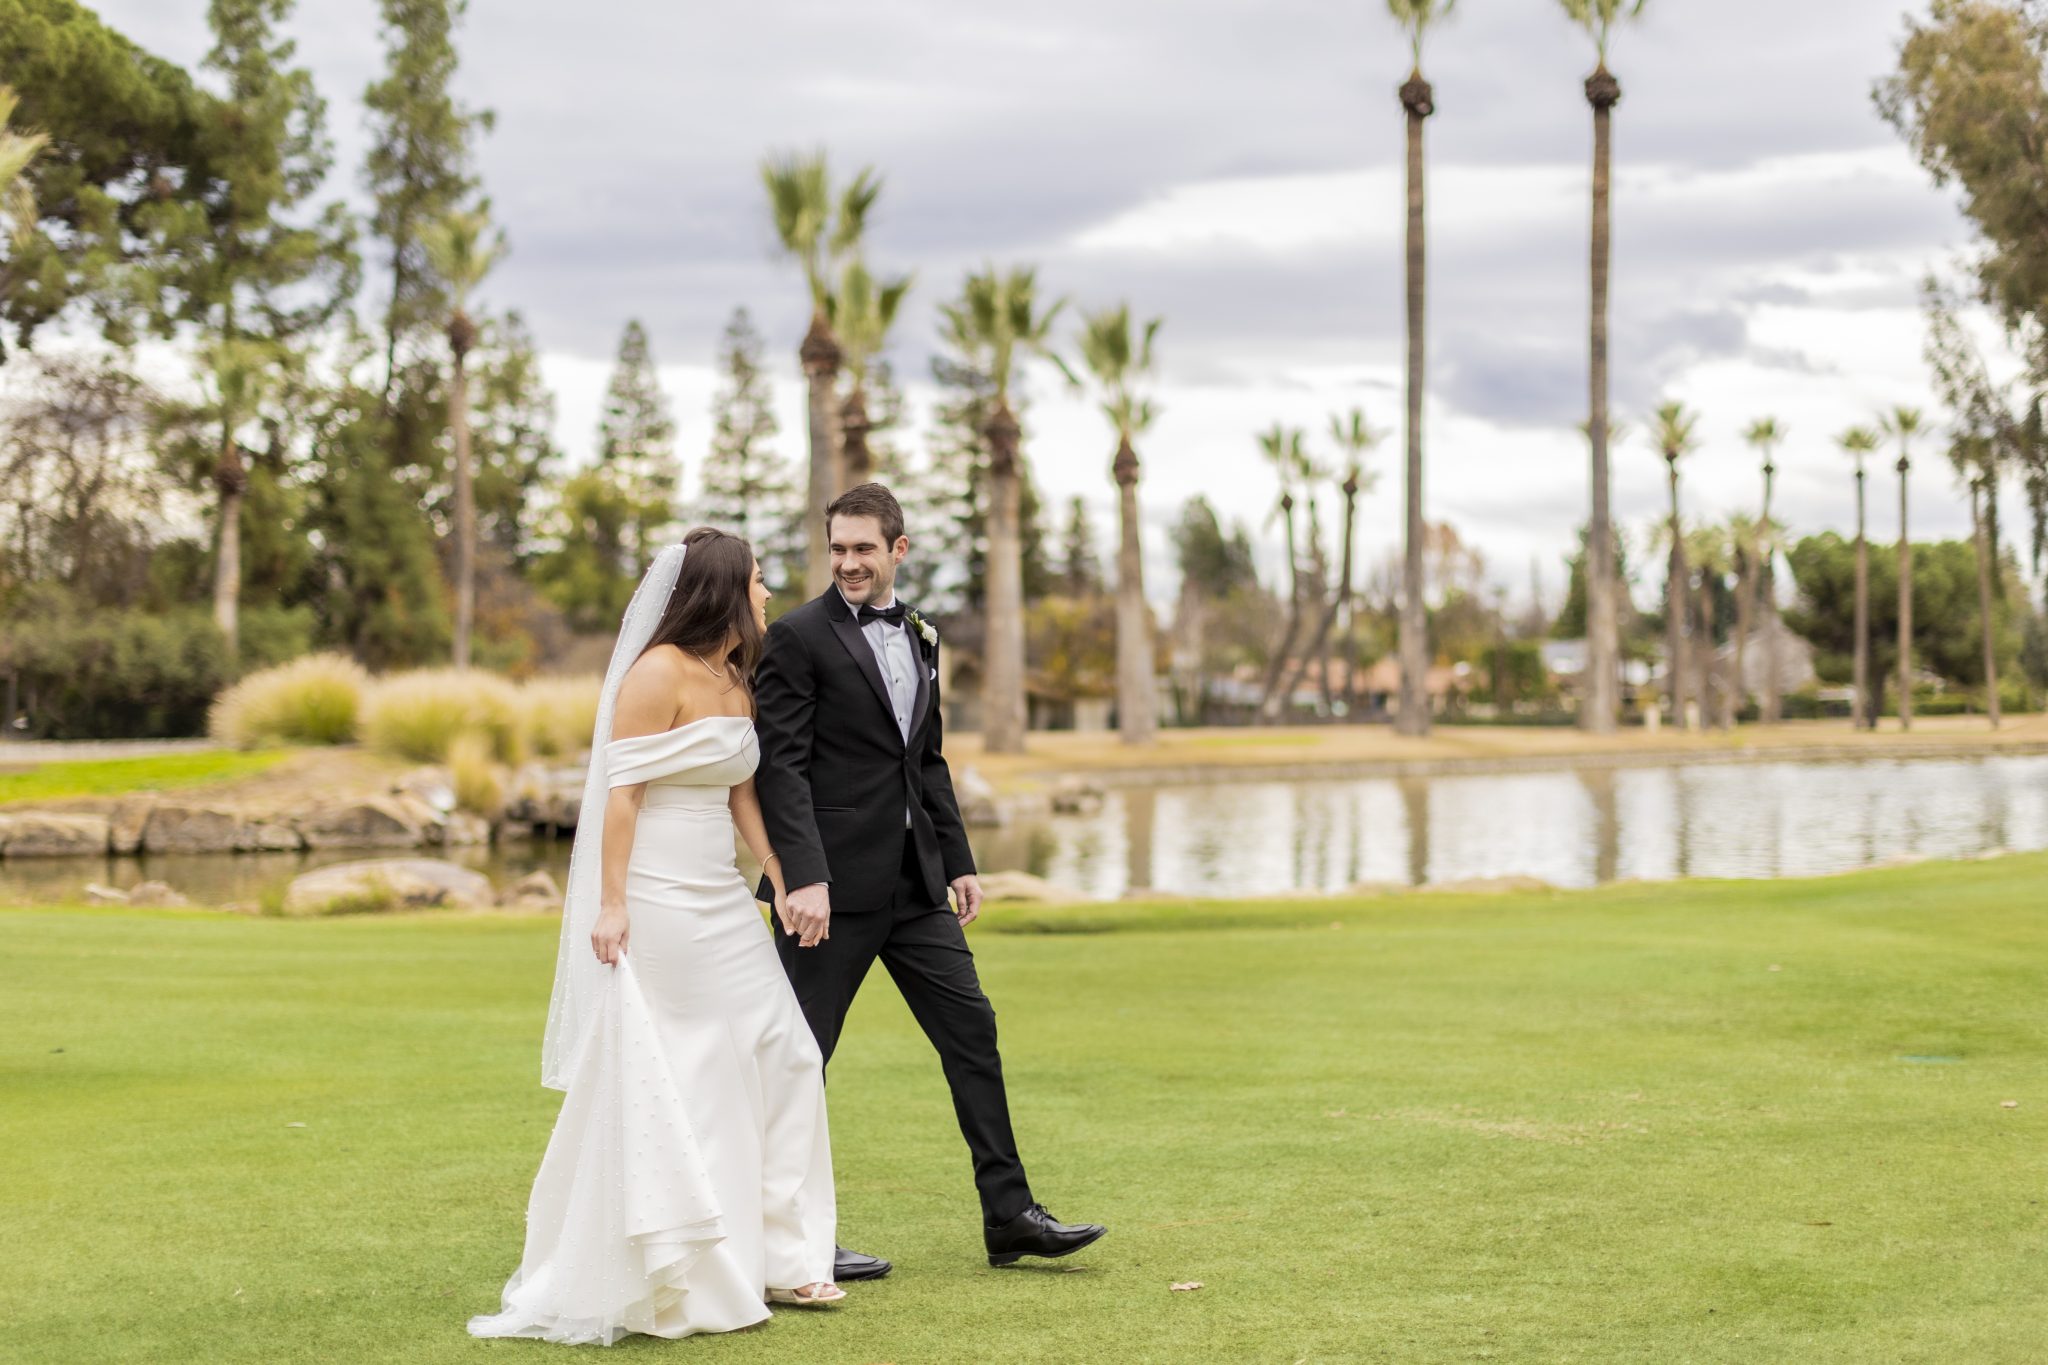 Stockdale Country Club: Where Old-World Charm Meets Modern Elegance